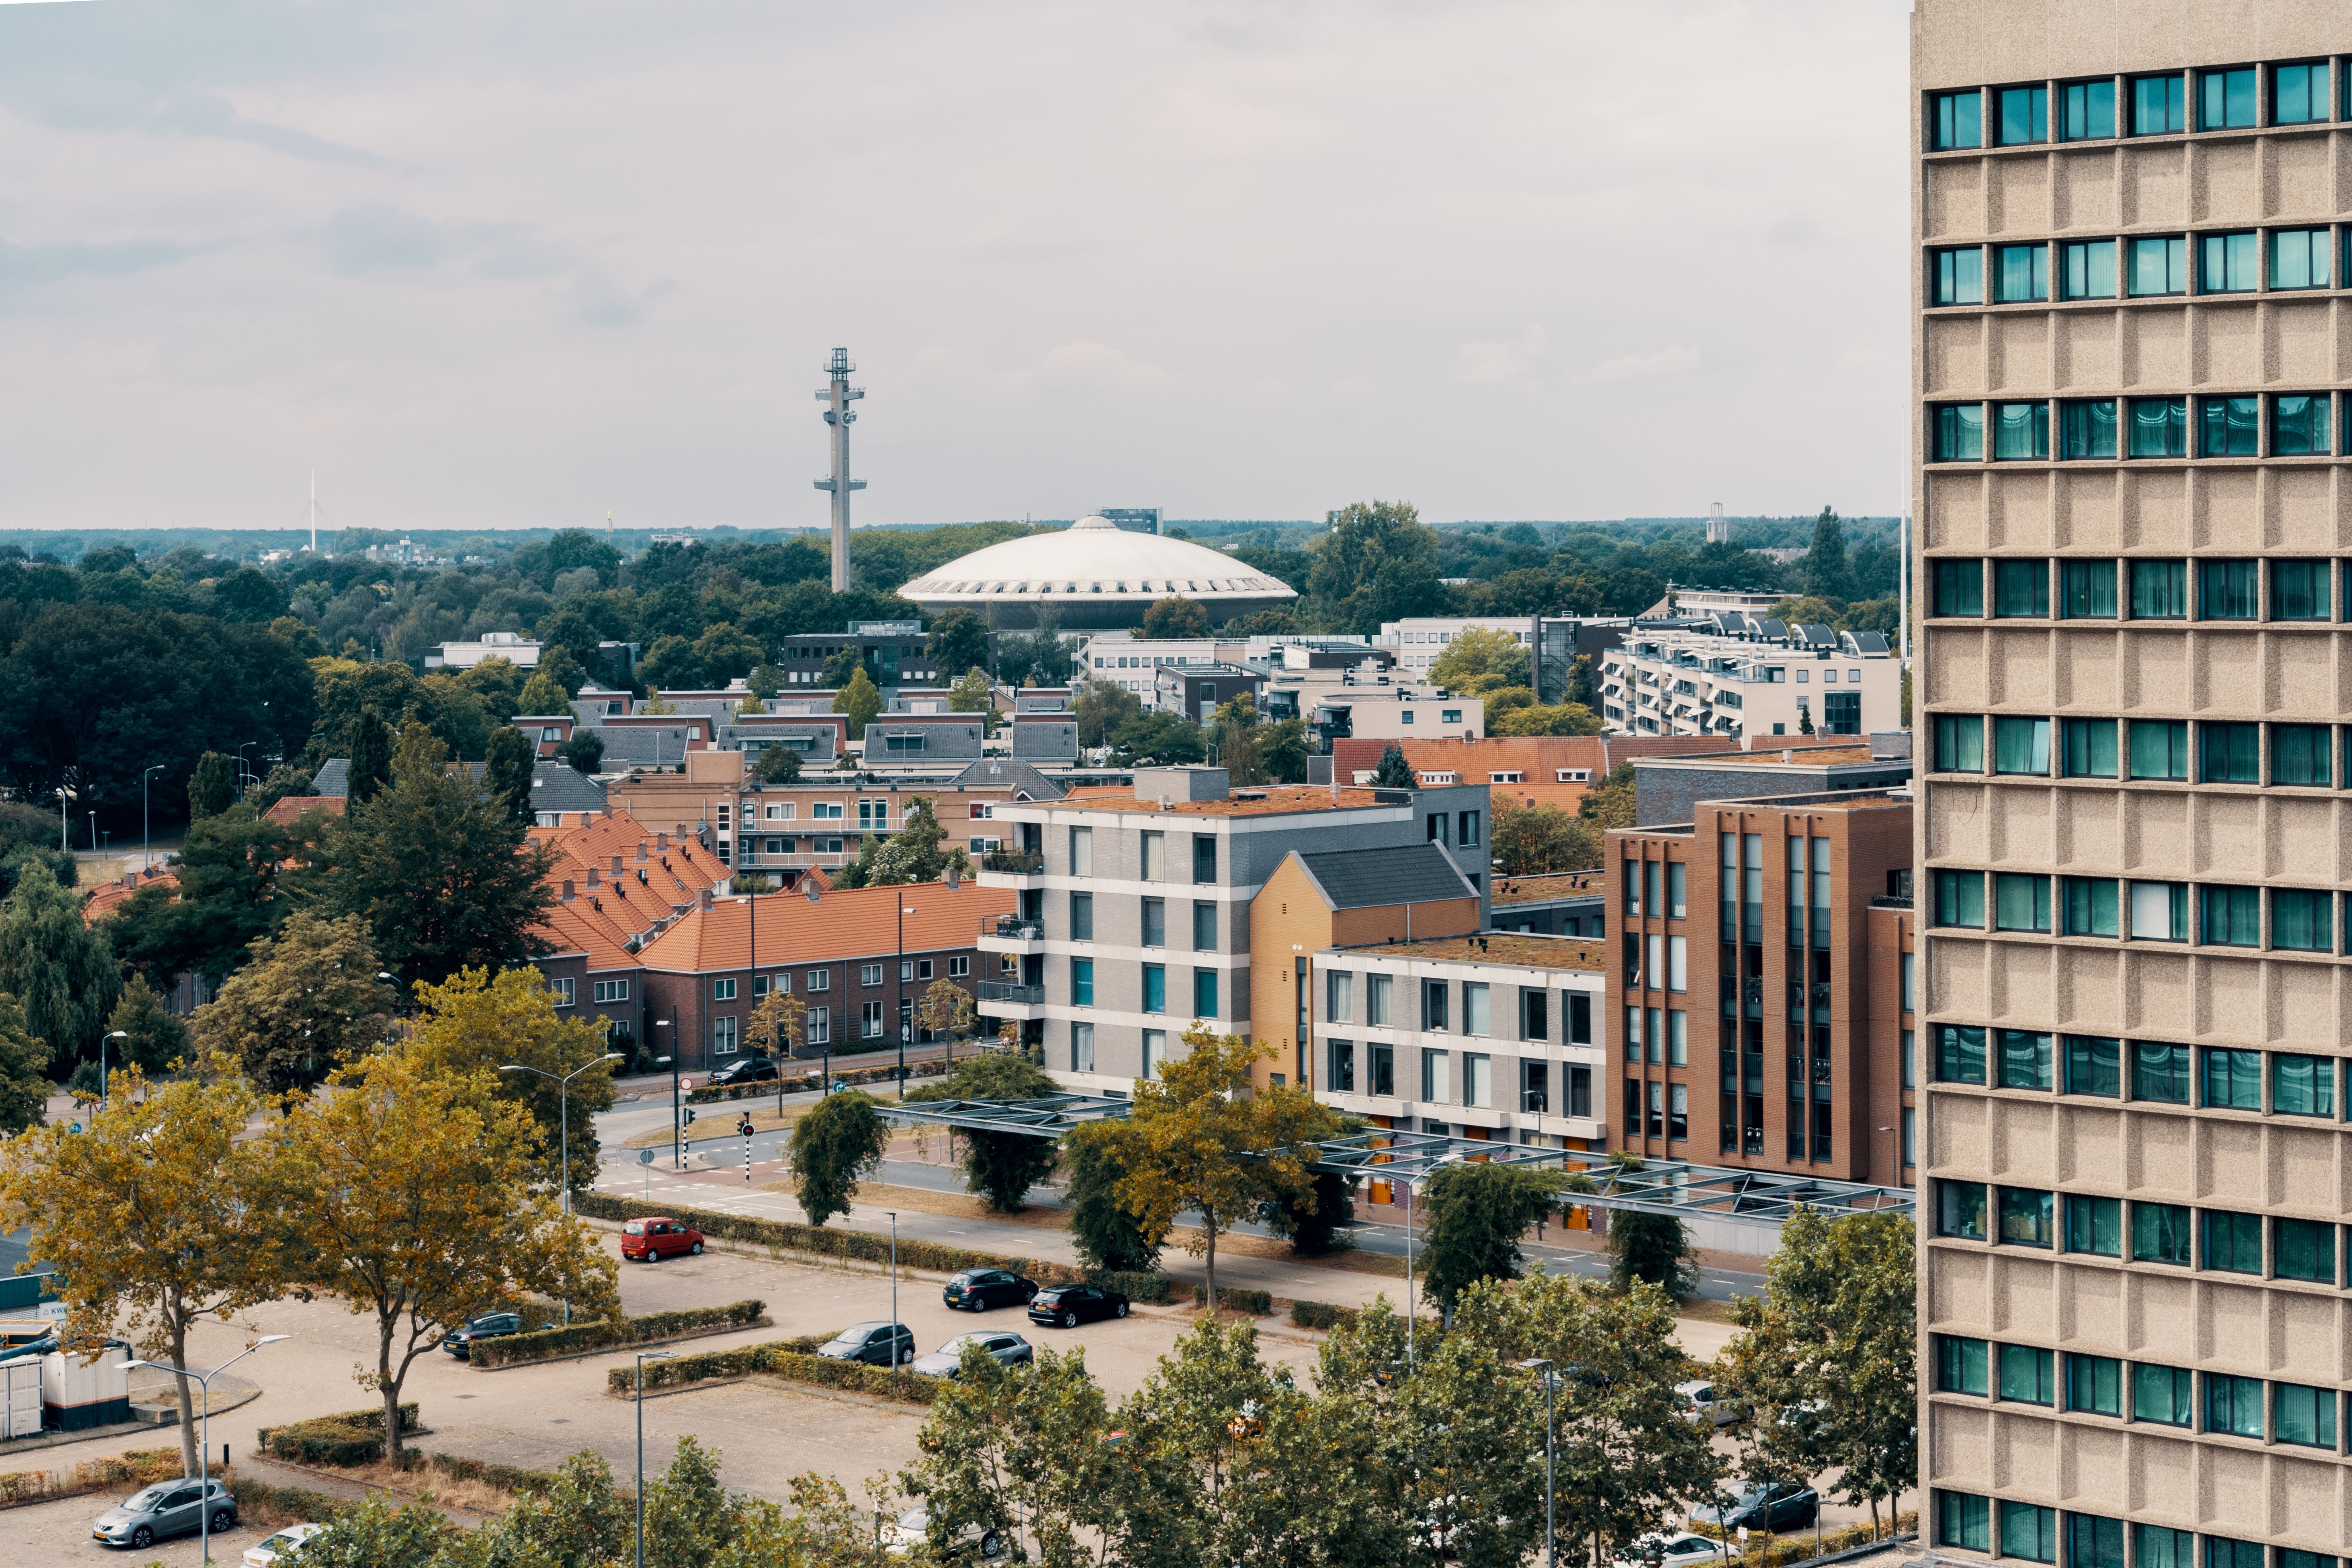 A picture of Eindhoven's skyline taken during the day